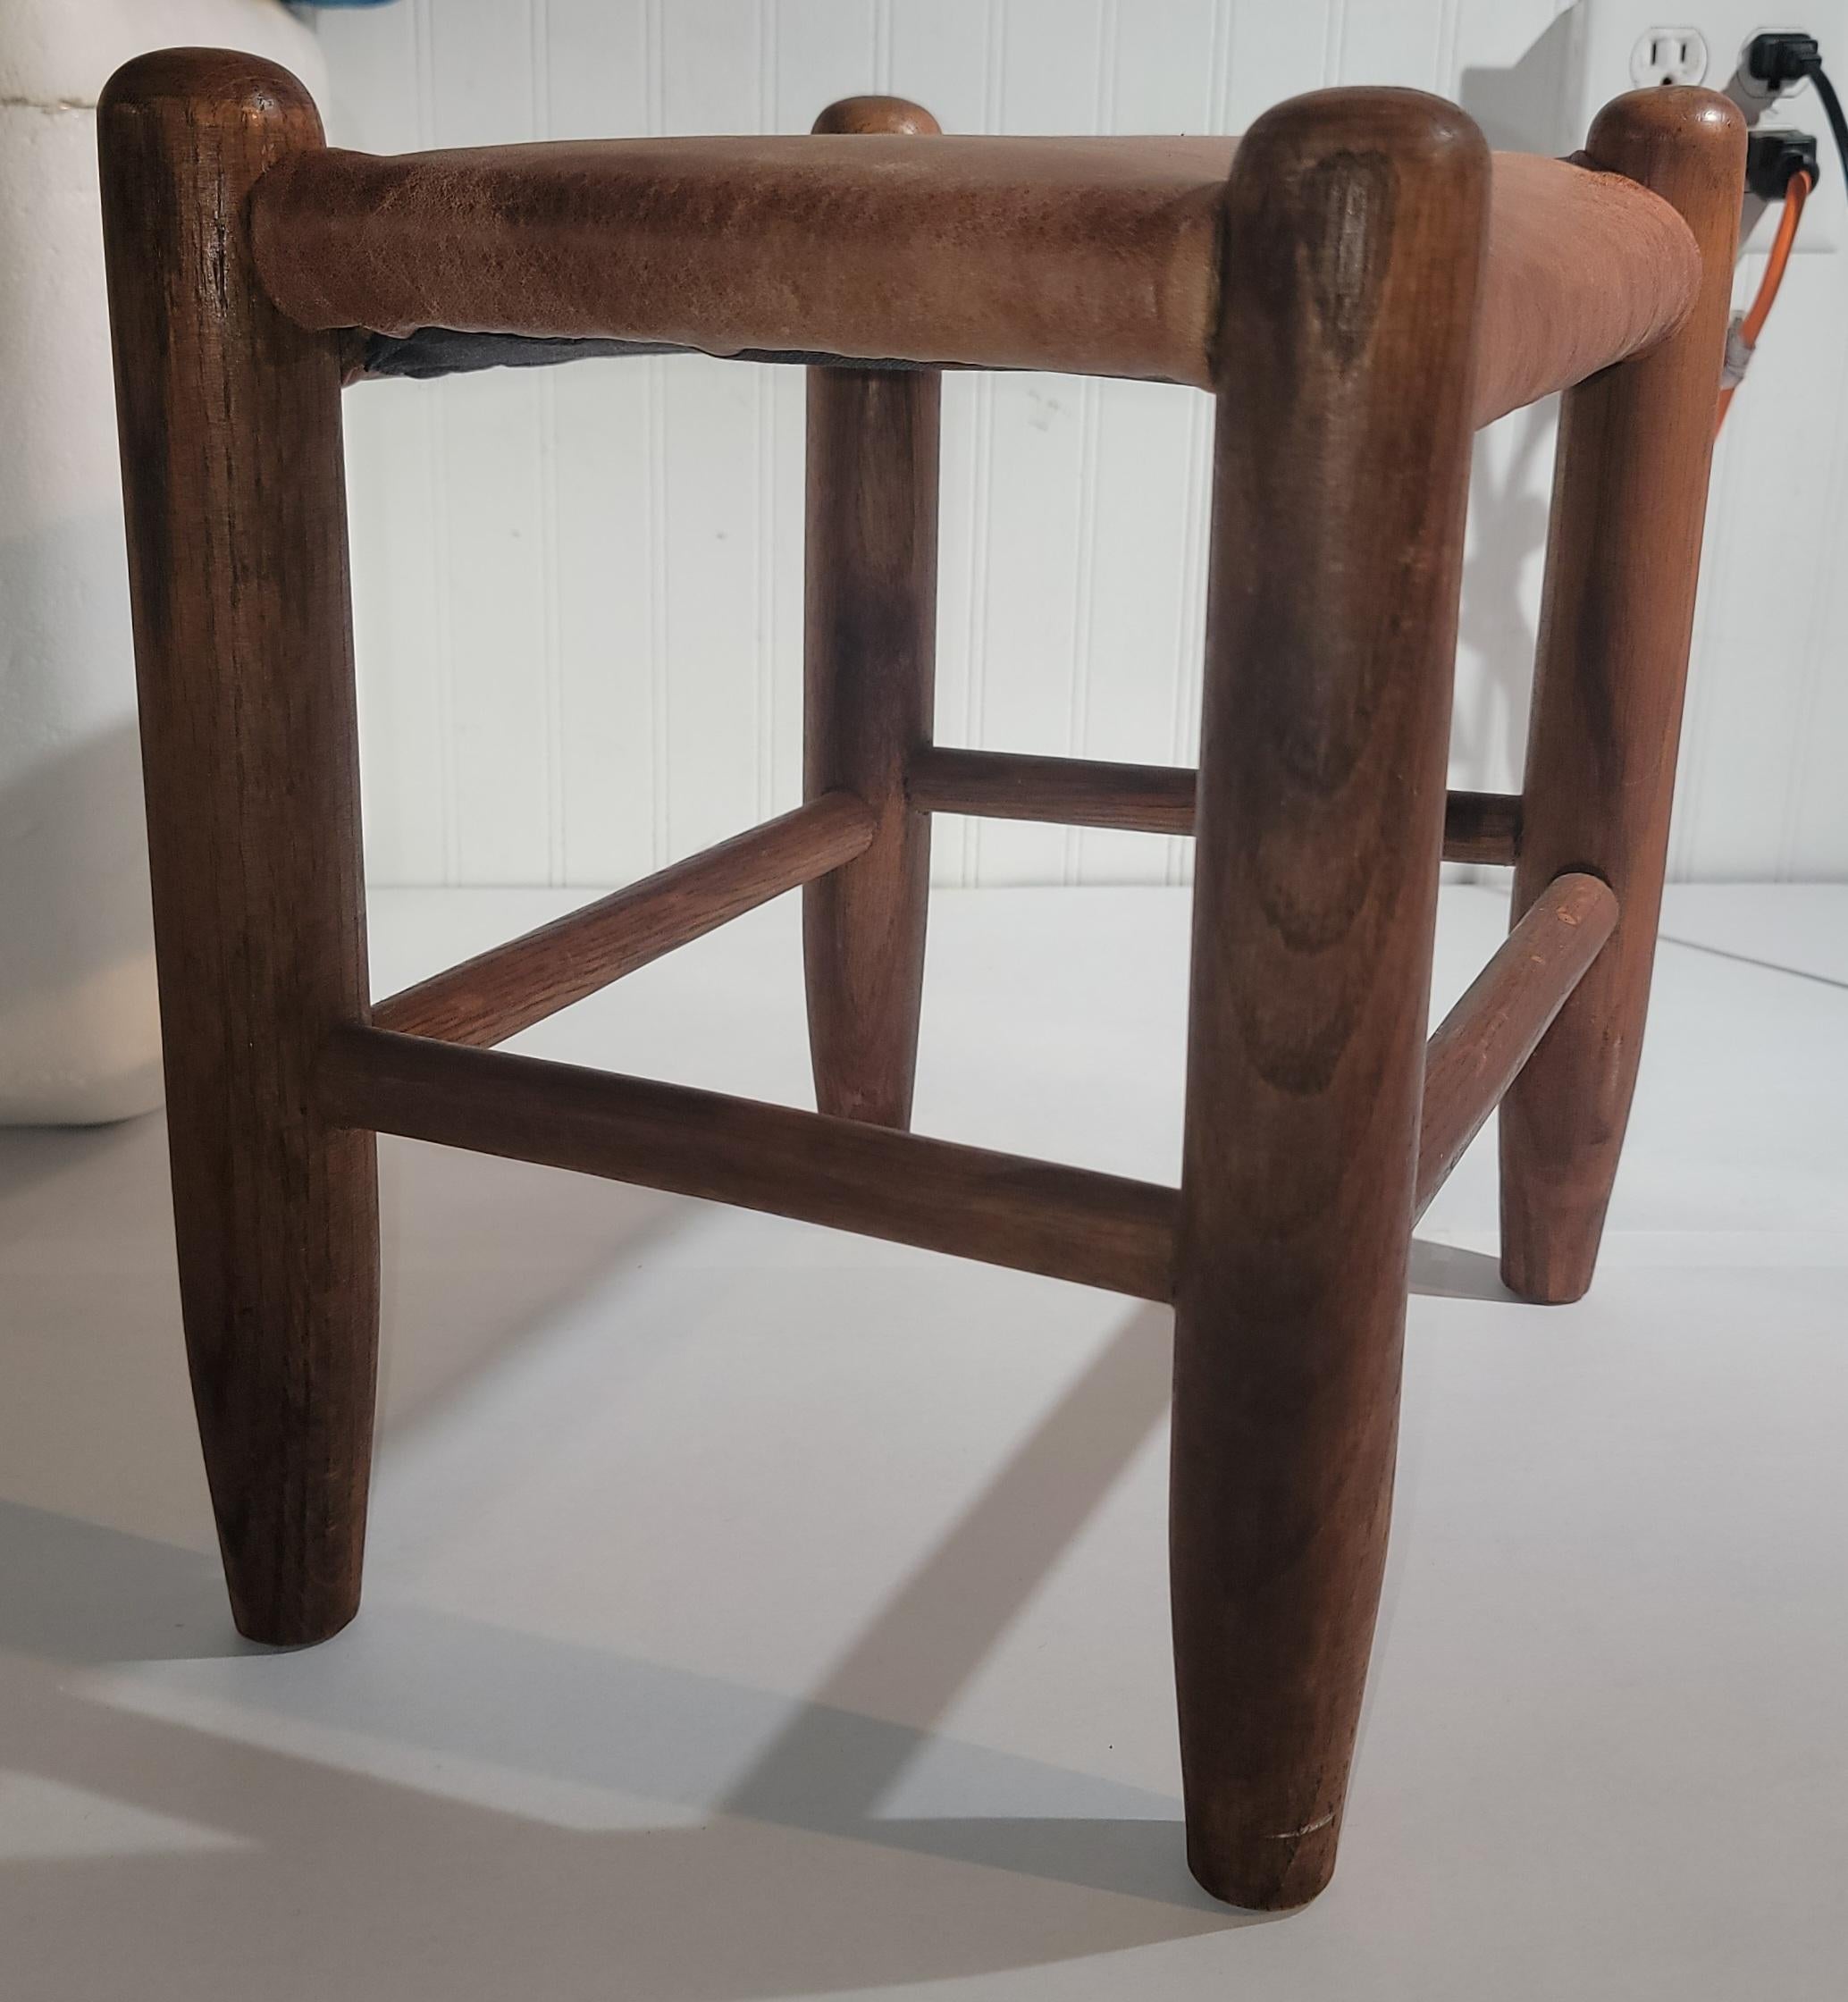 This fine strong & sturdy stool has a distressed leather seat or top.It is in fine condition.